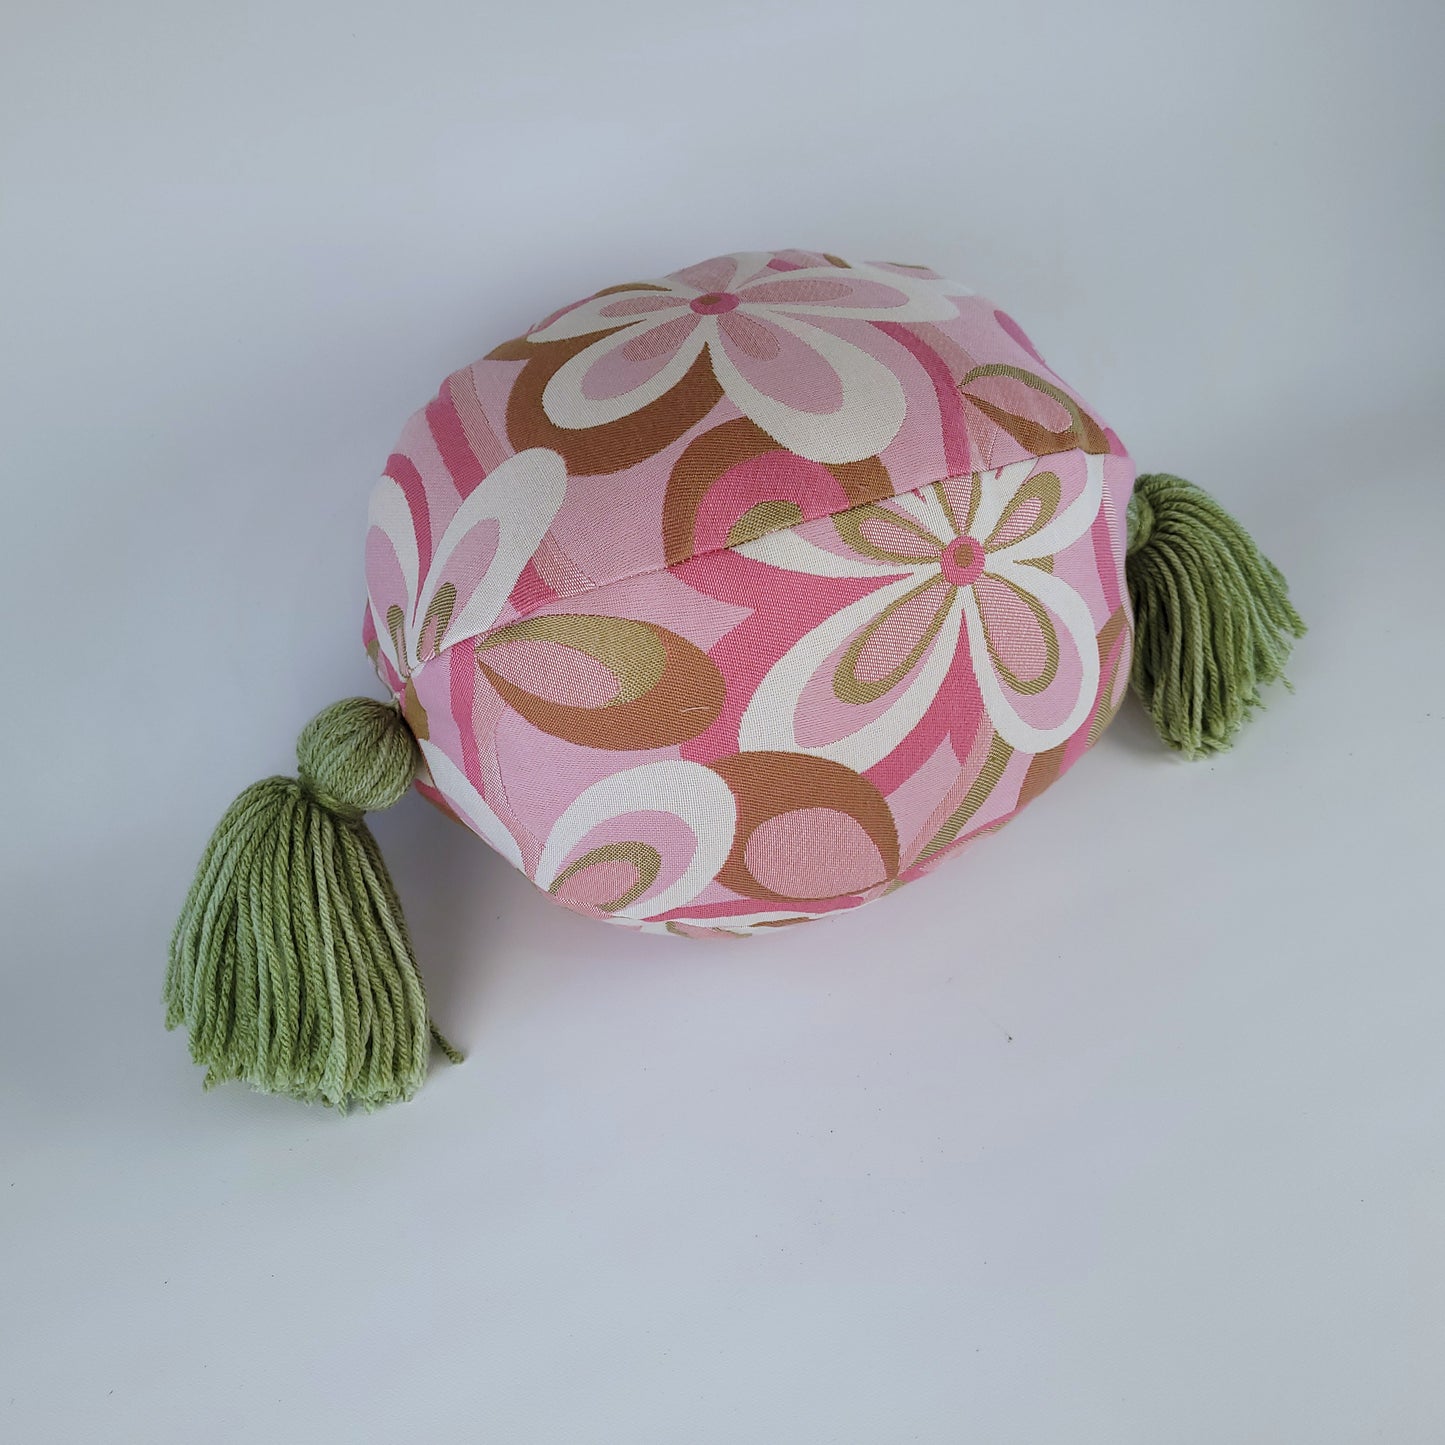 Vintage 1970s Pink and Green Flower-Power Accent Pillow with Handmade Tassels